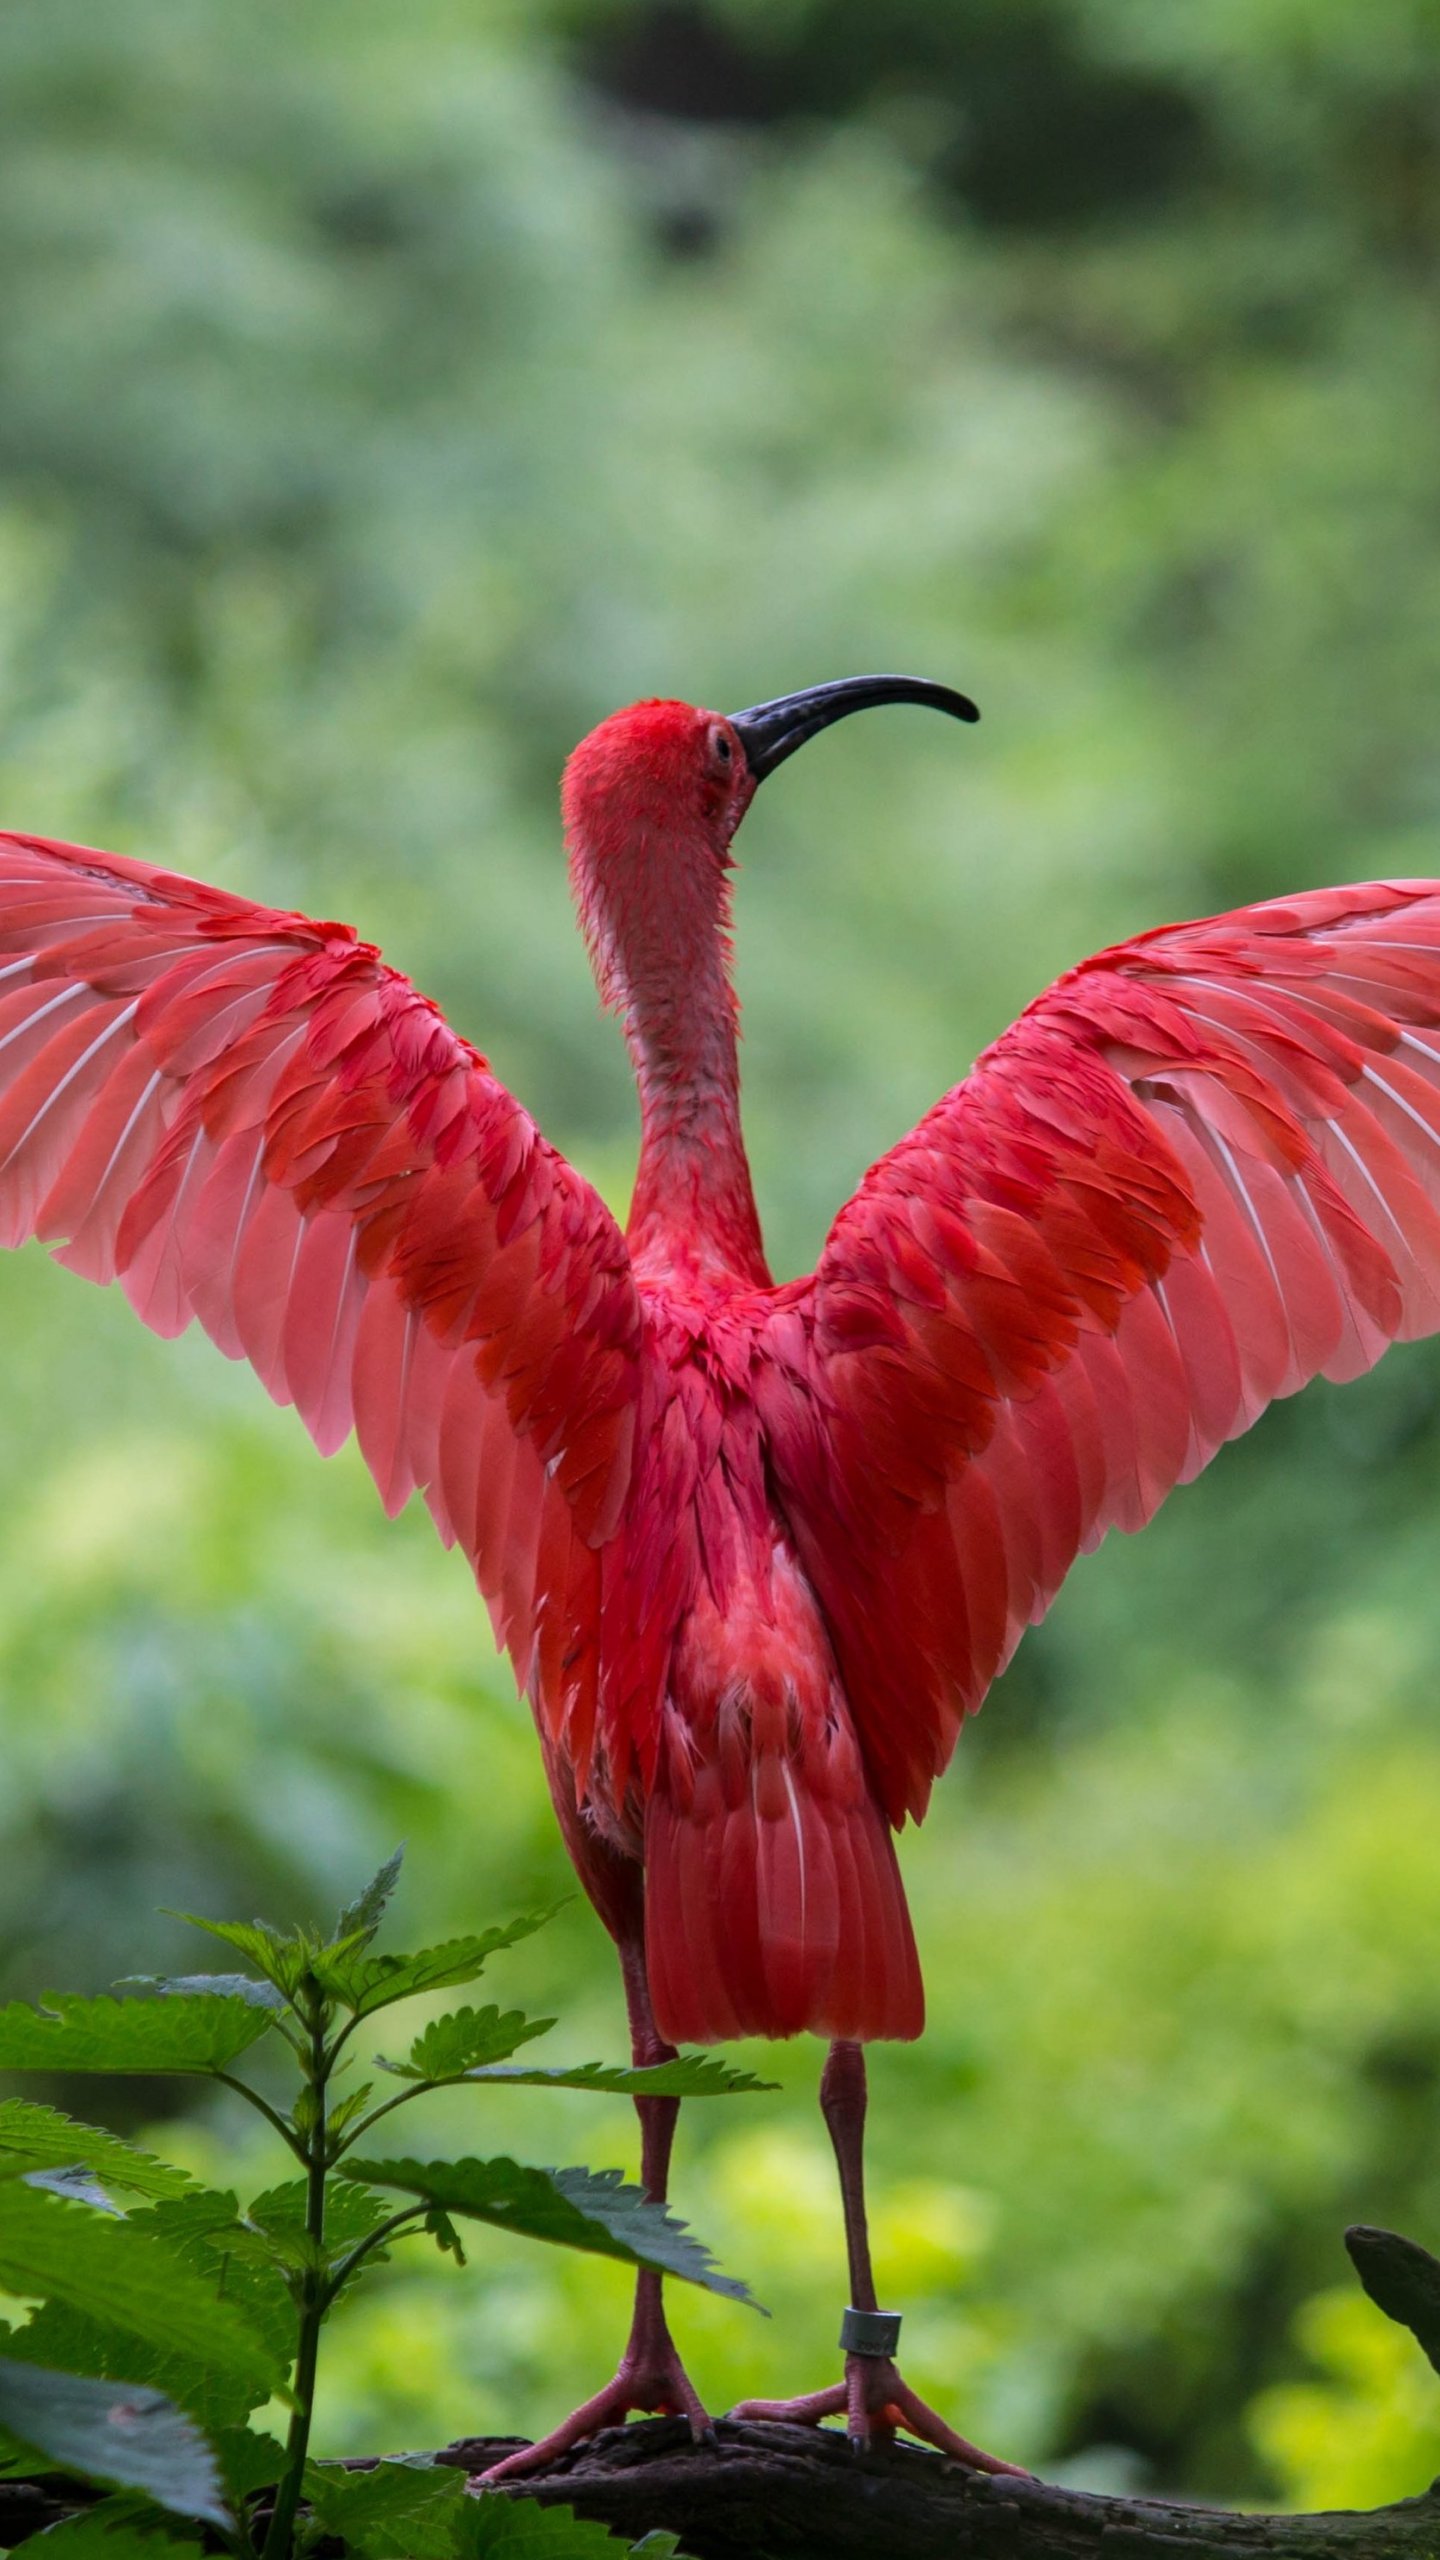 Scarlet Ibis Spreading Its Wings Wallpaper - iPhone, Android & Desktop  Backgrounds